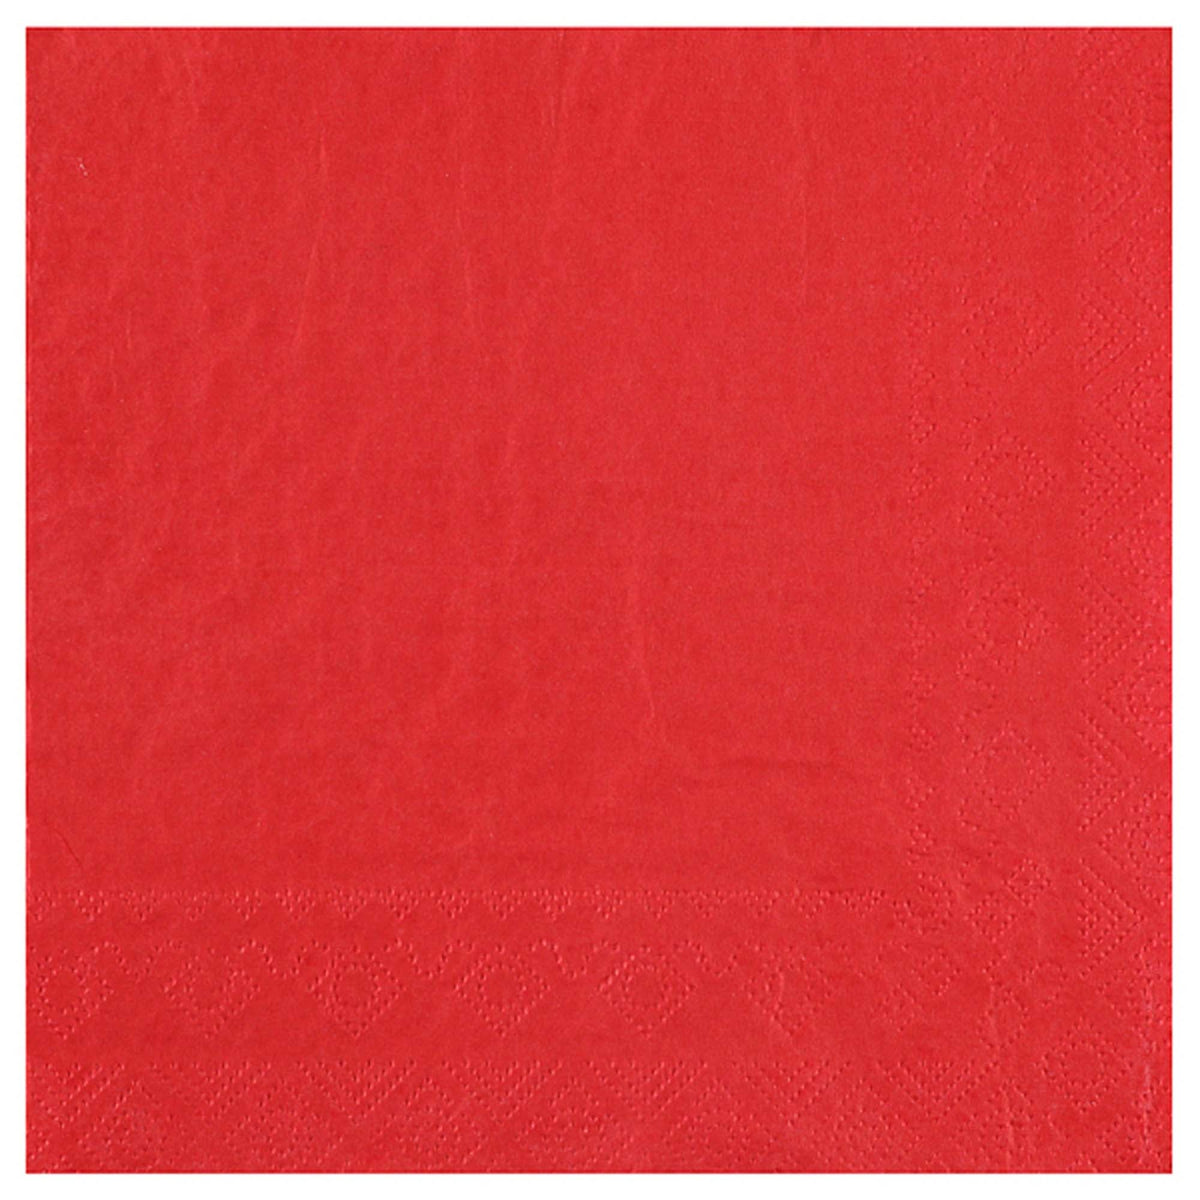 SANTEX Everyday Entertaining Red Large Lunch Napkins, 25 Count 3660380090045